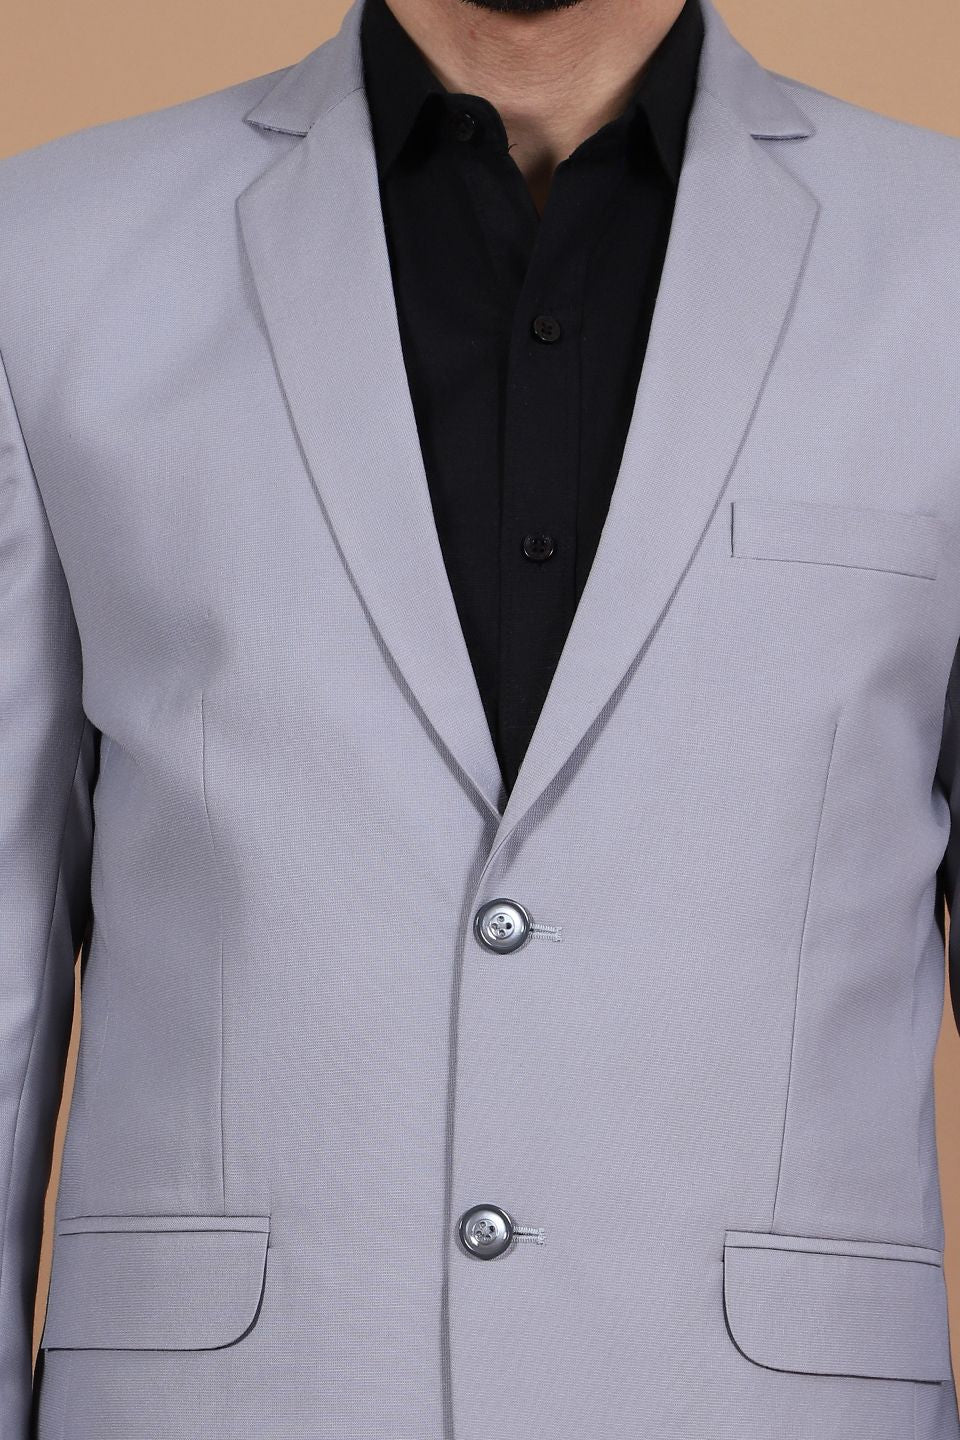 Polyester Cotton Grey Two Piece Suit